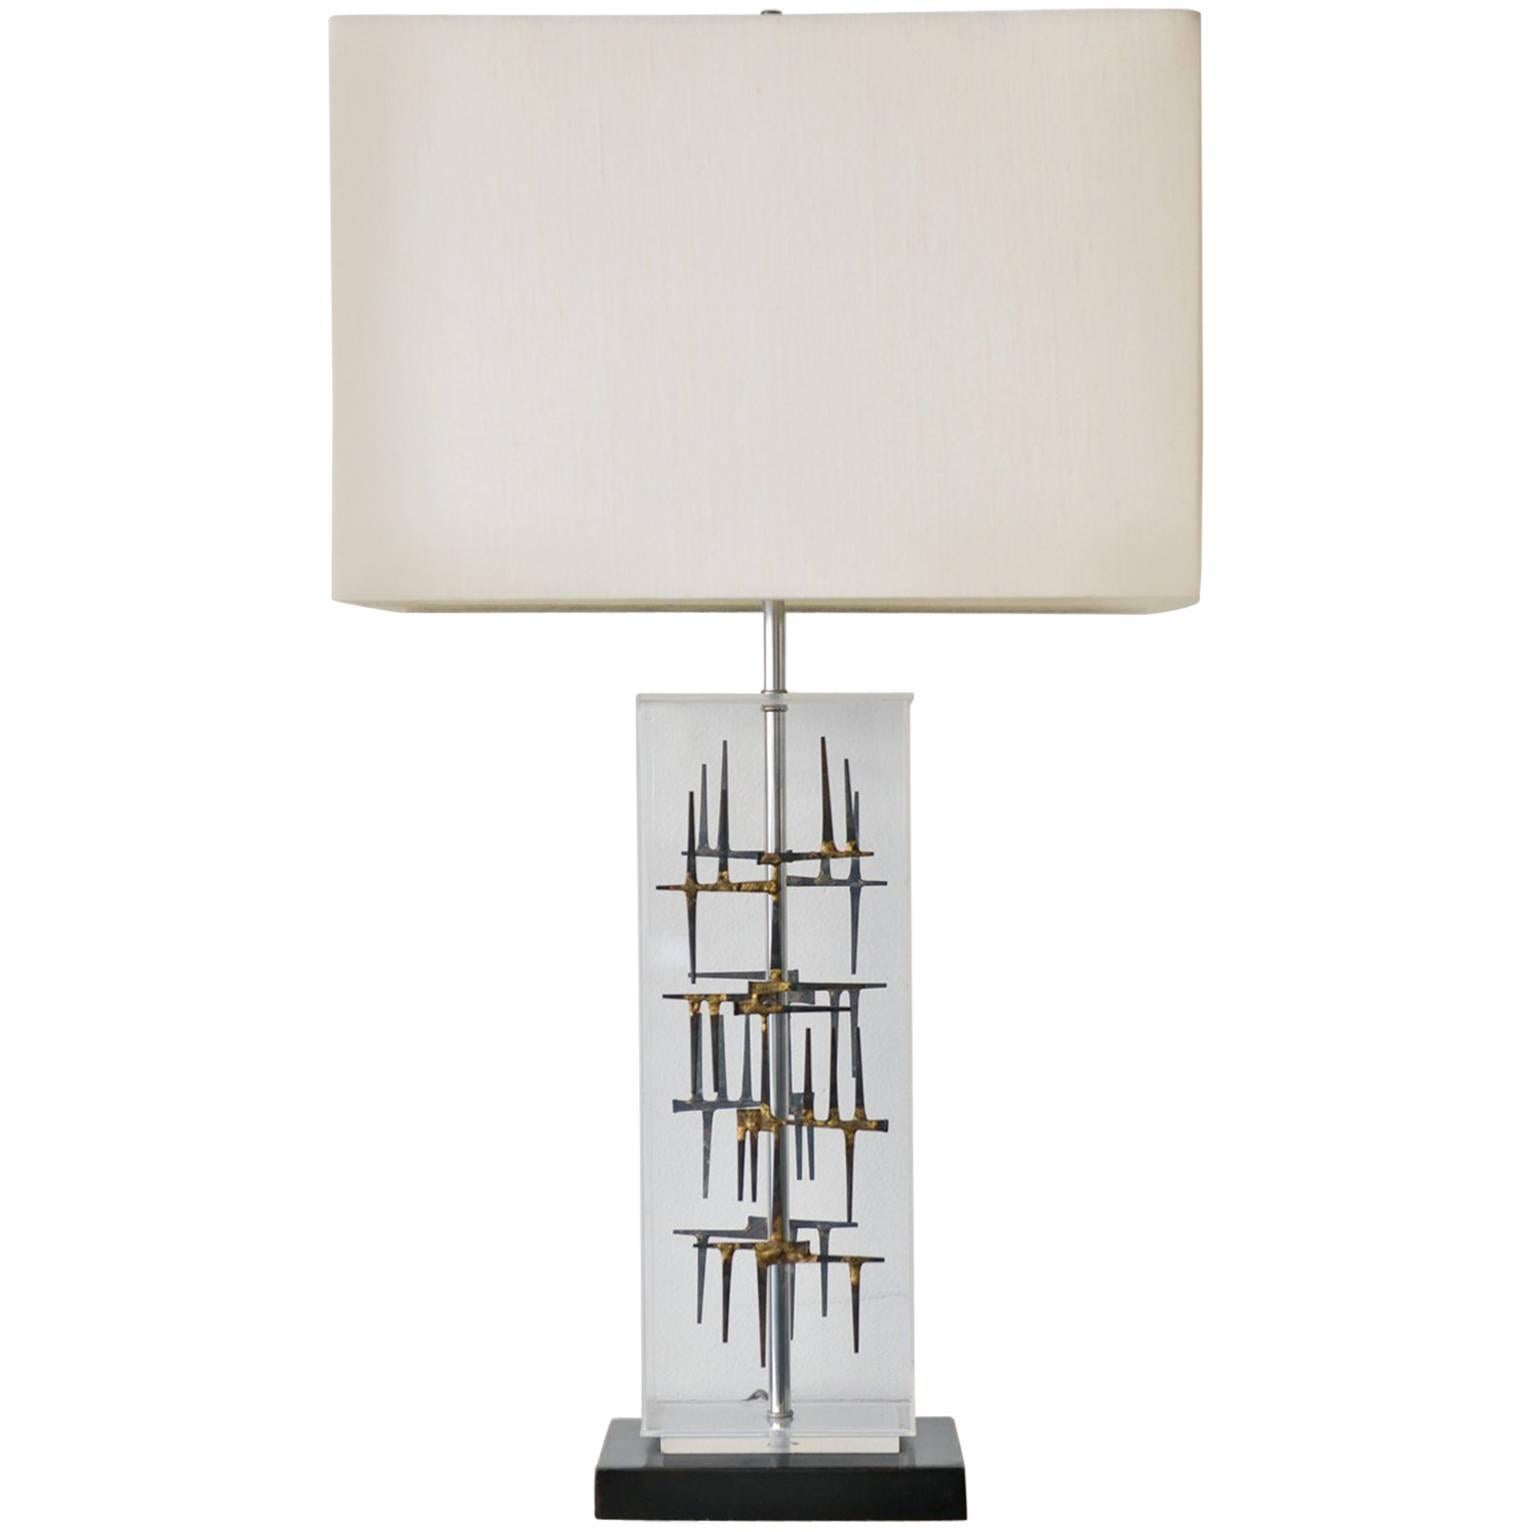 Lucite and Nail Brutalist Lamp by Laurel, circa 1970